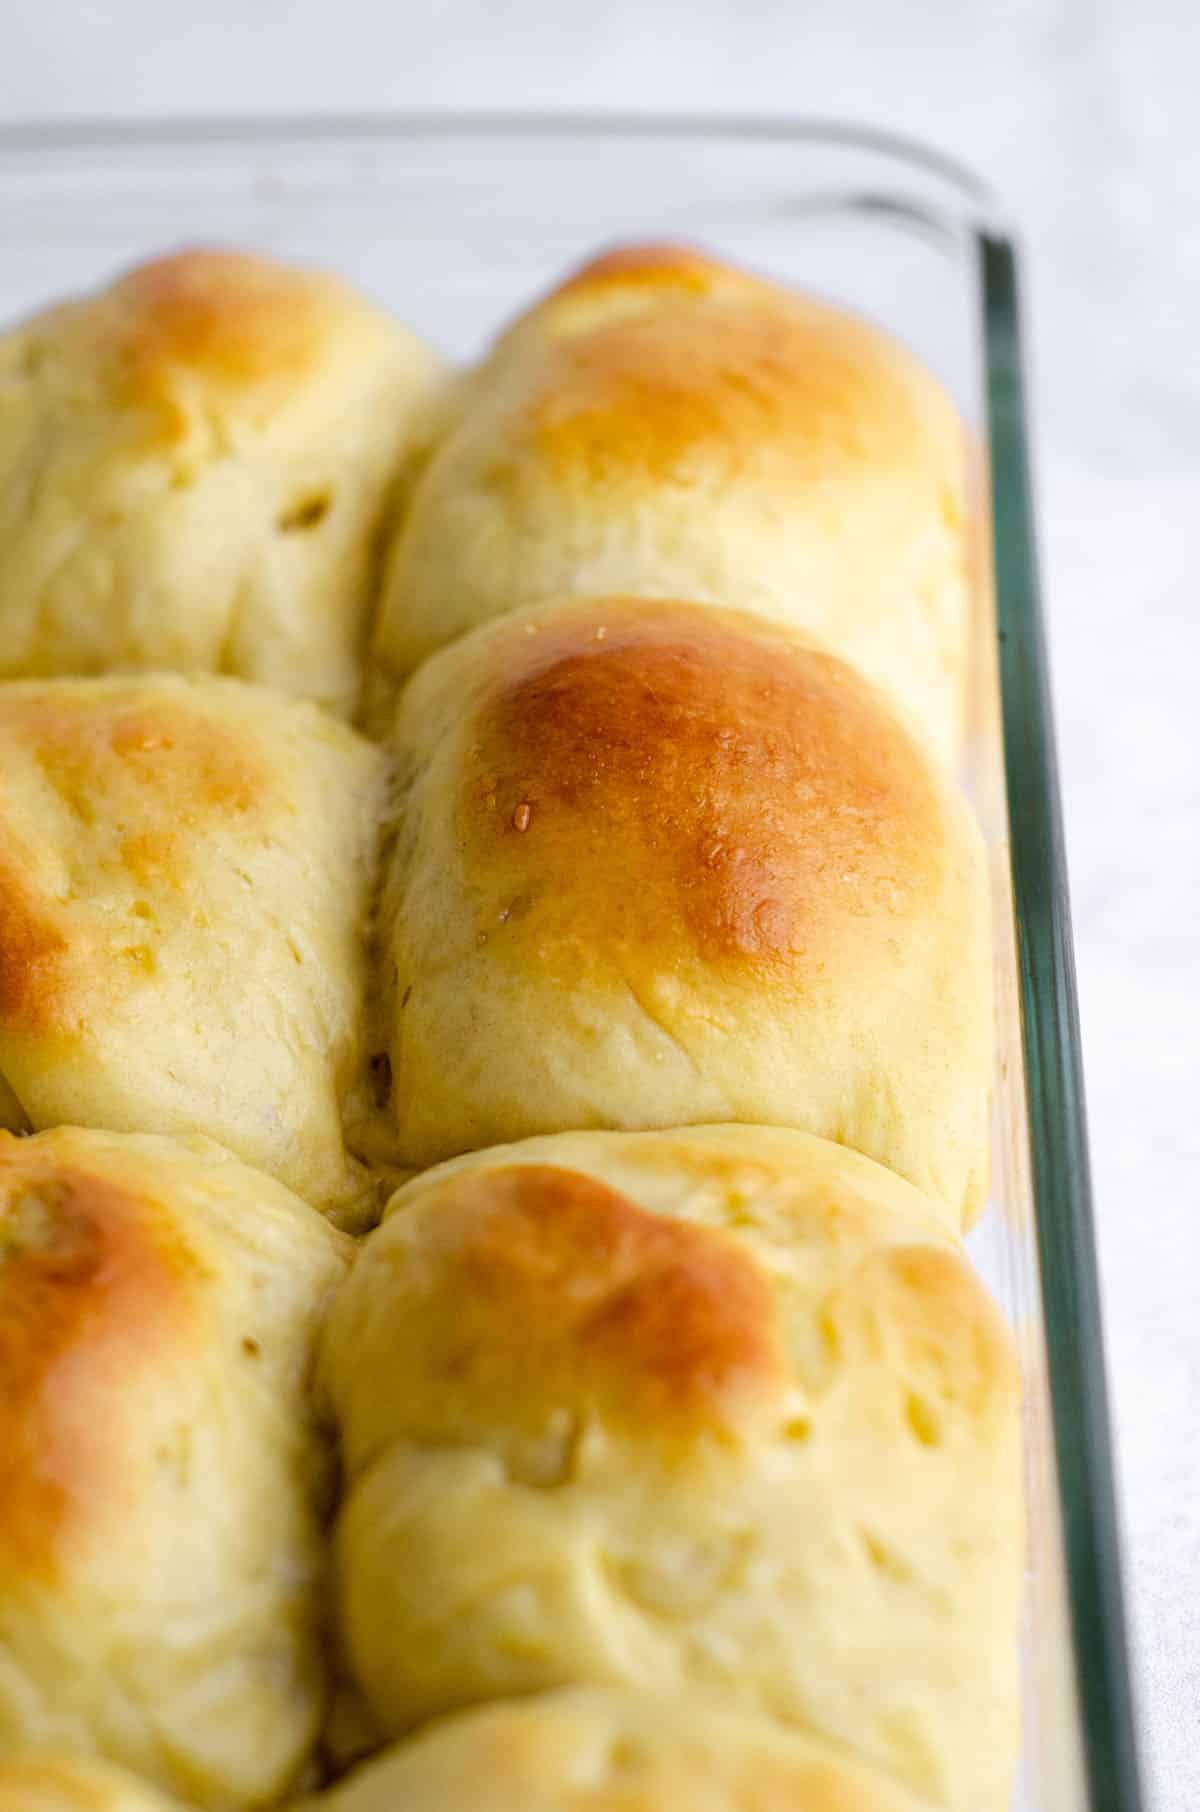 baked easy yeast rolls in a glass baking pan